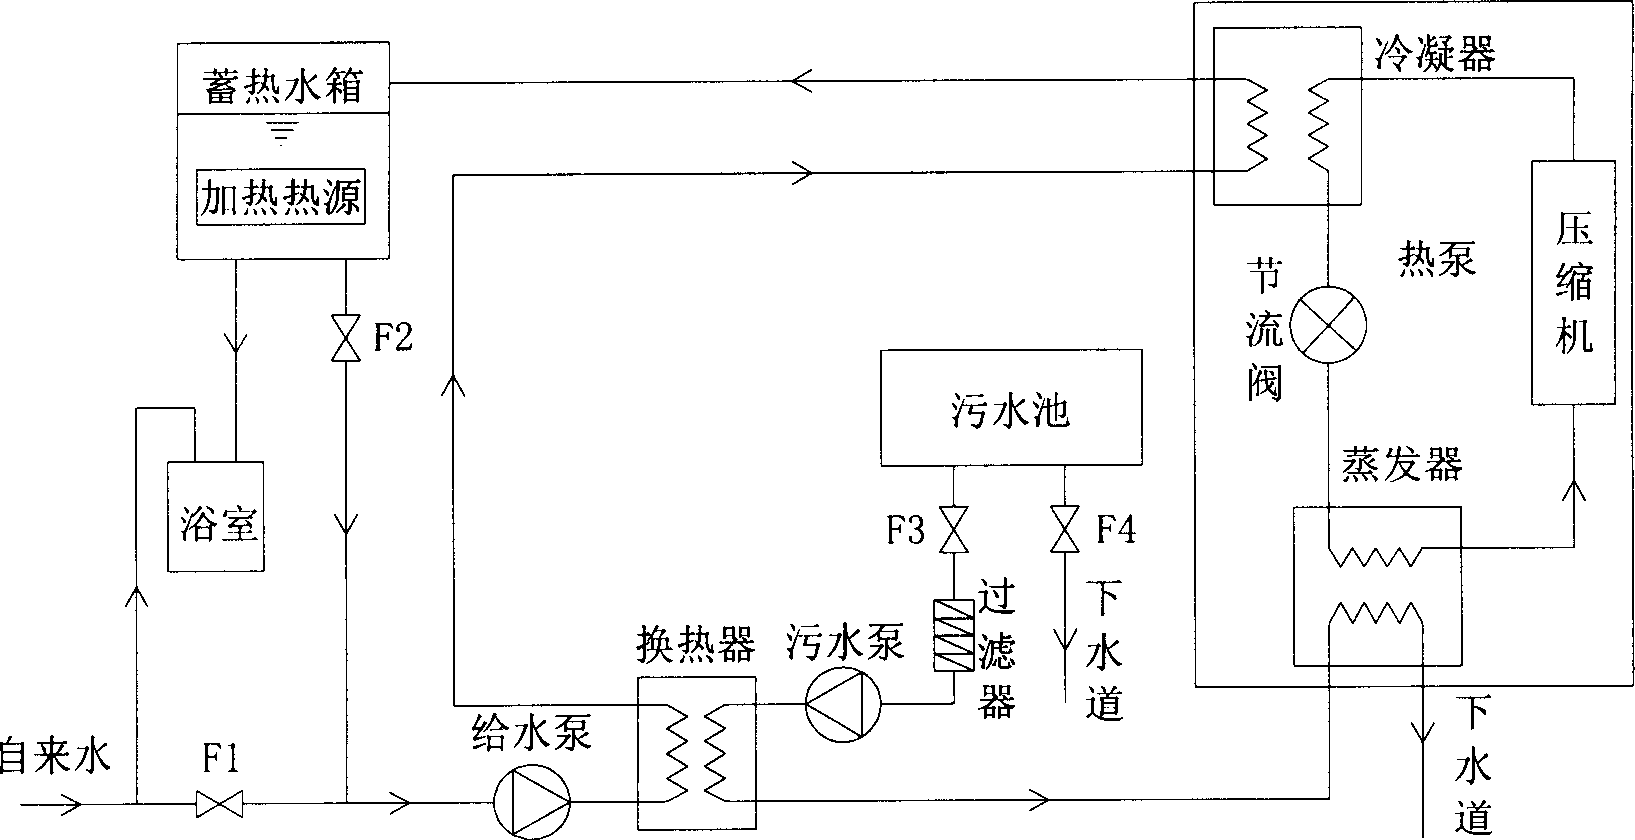 Wash apparatus of heat pump of recovering residual heat from bathhouse